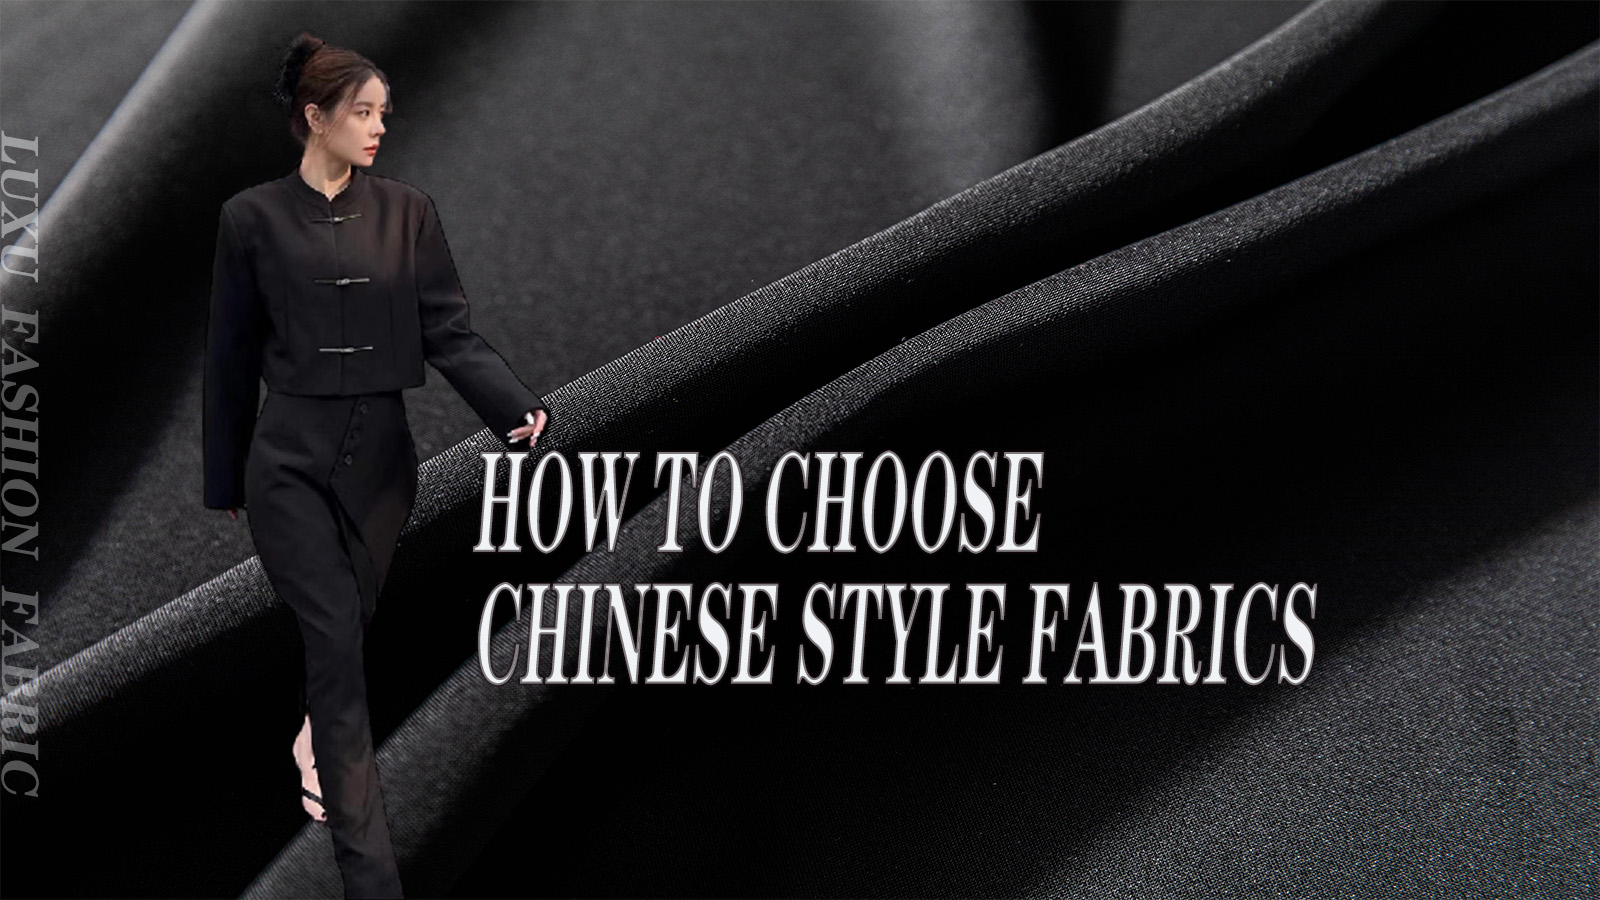 How to choose Chinese style fabrics